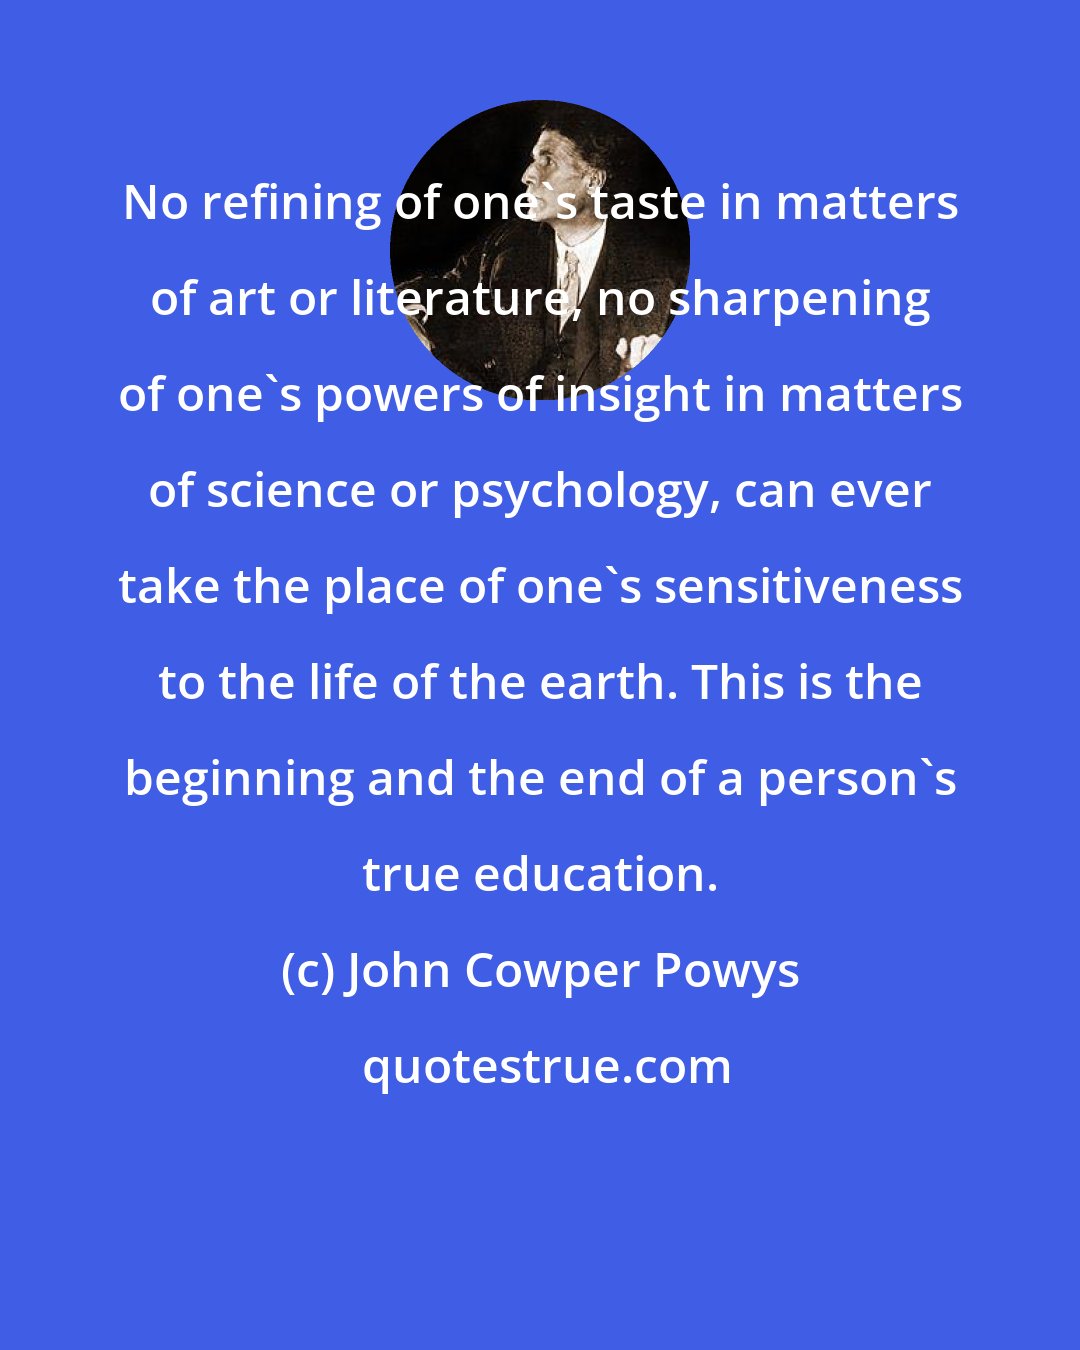 John Cowper Powys: No refining of one's taste in matters of art or literature, no sharpening of one's powers of insight in matters of science or psychology, can ever take the place of one's sensitiveness to the life of the earth. This is the beginning and the end of a person's true education.